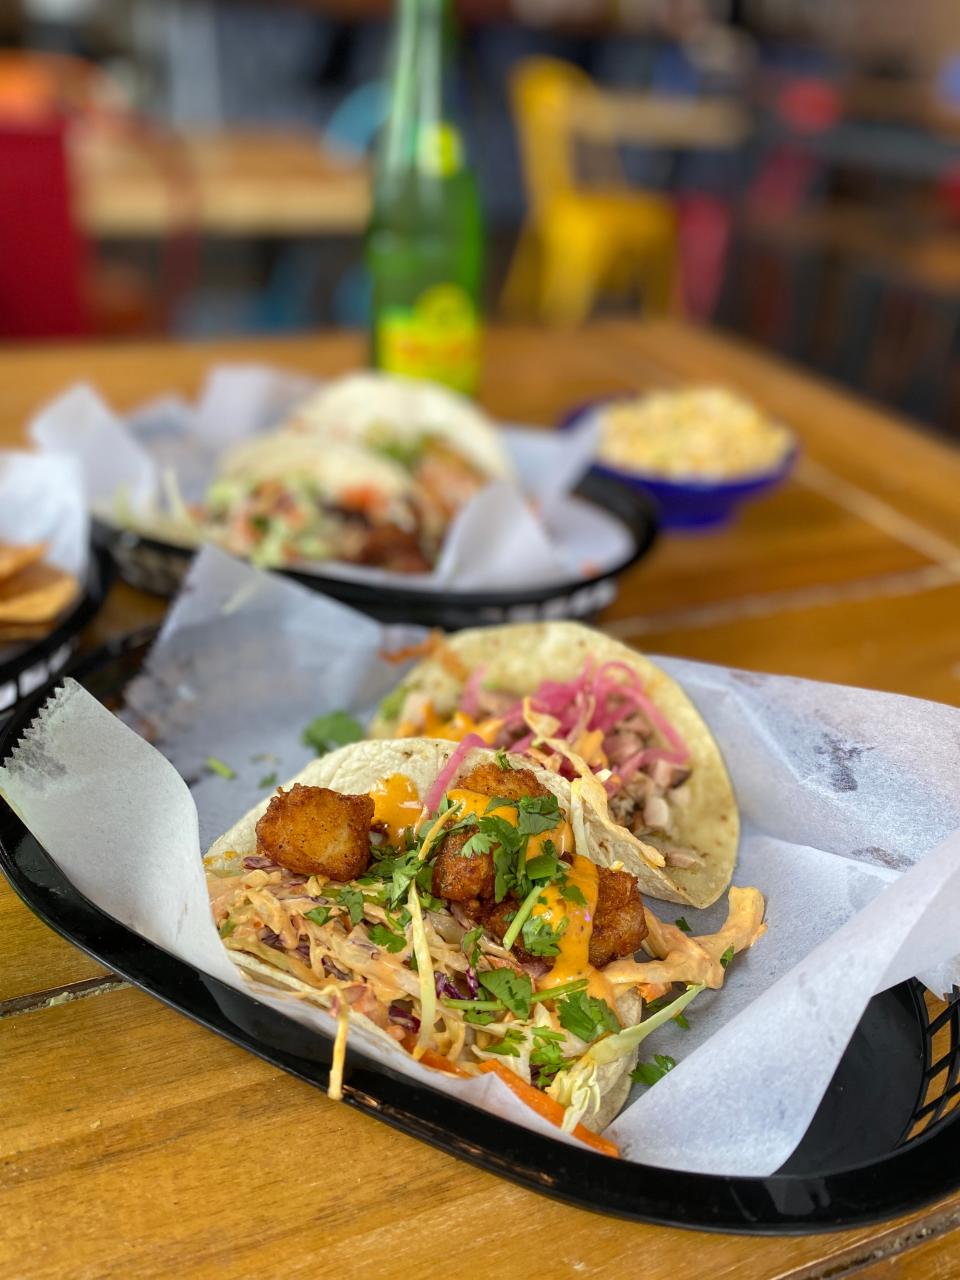 El Mero Taco in Cordova is known for its creative tacos that combine Mexican and Southern ingredients.